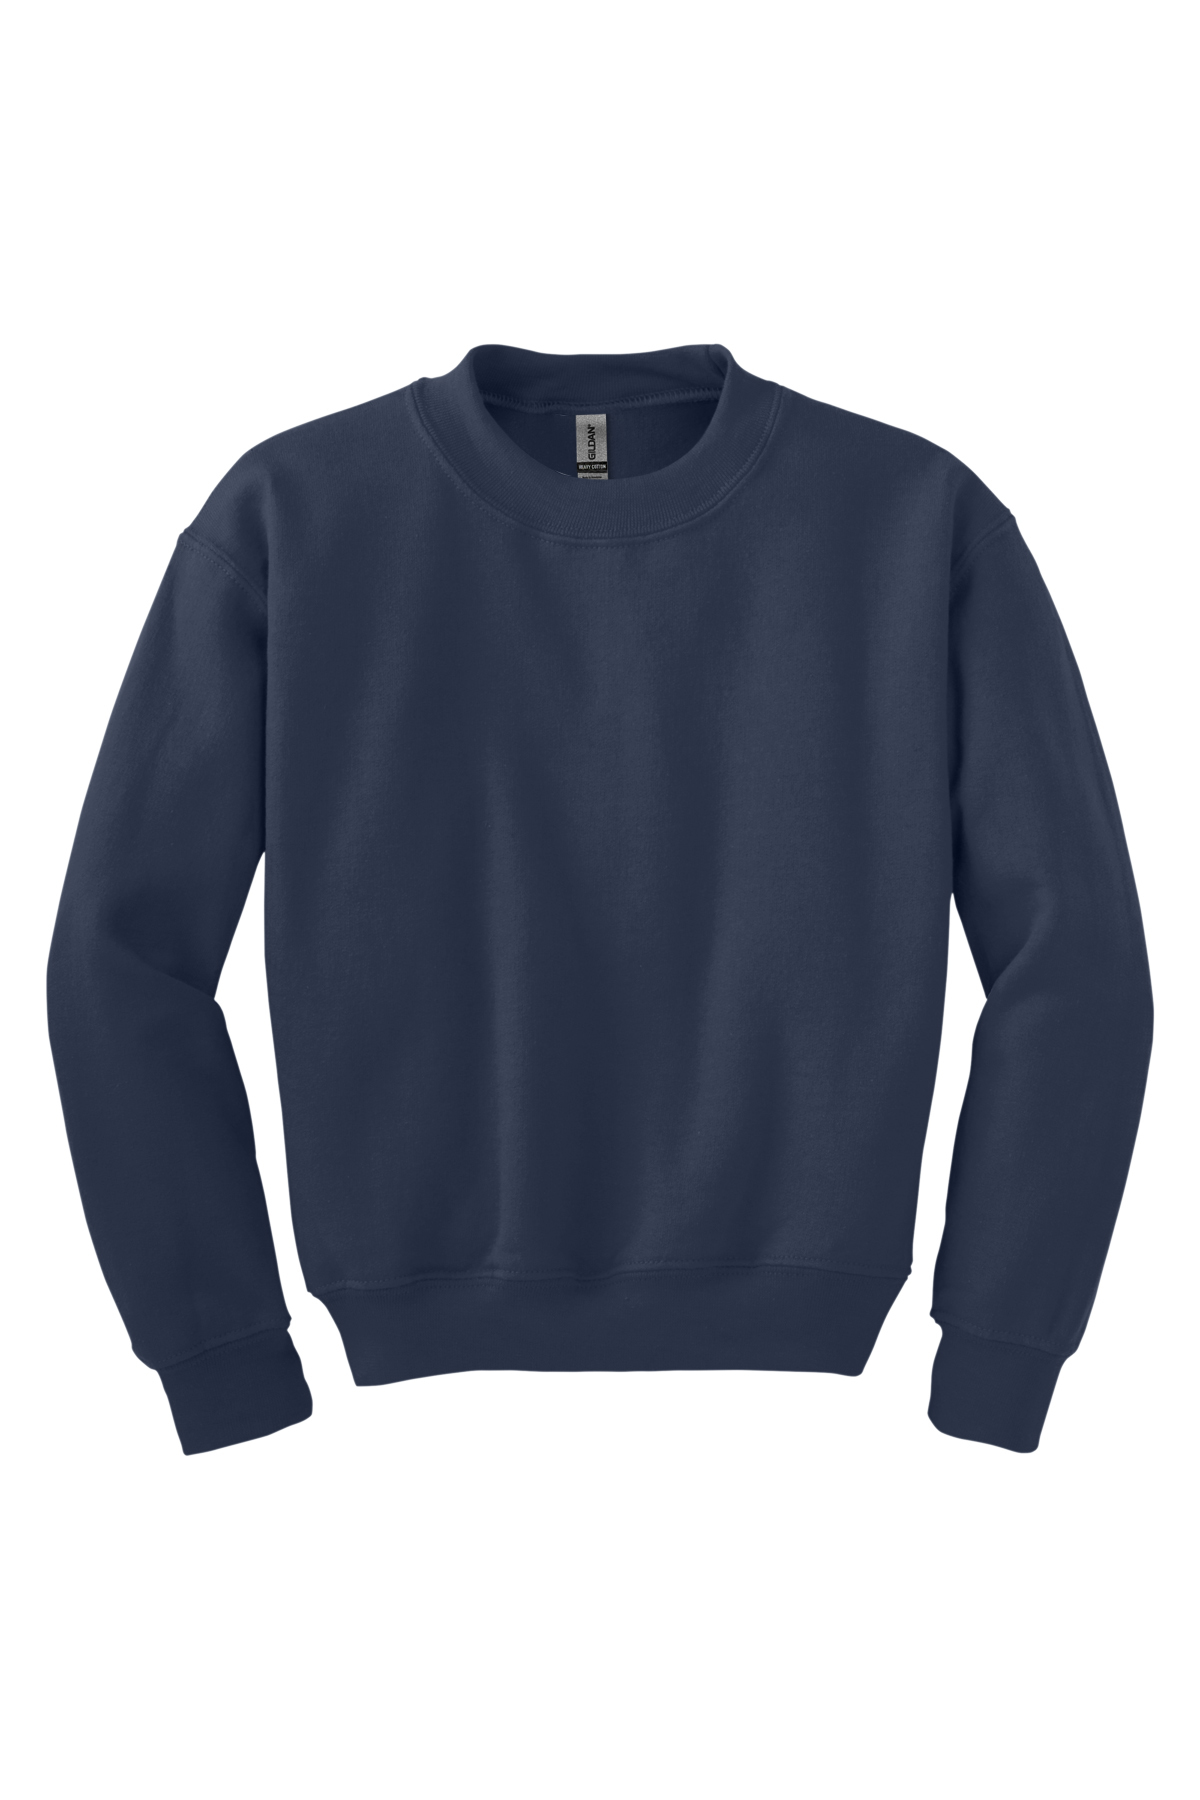 ESA - Adult navy color sweat shirt with logo